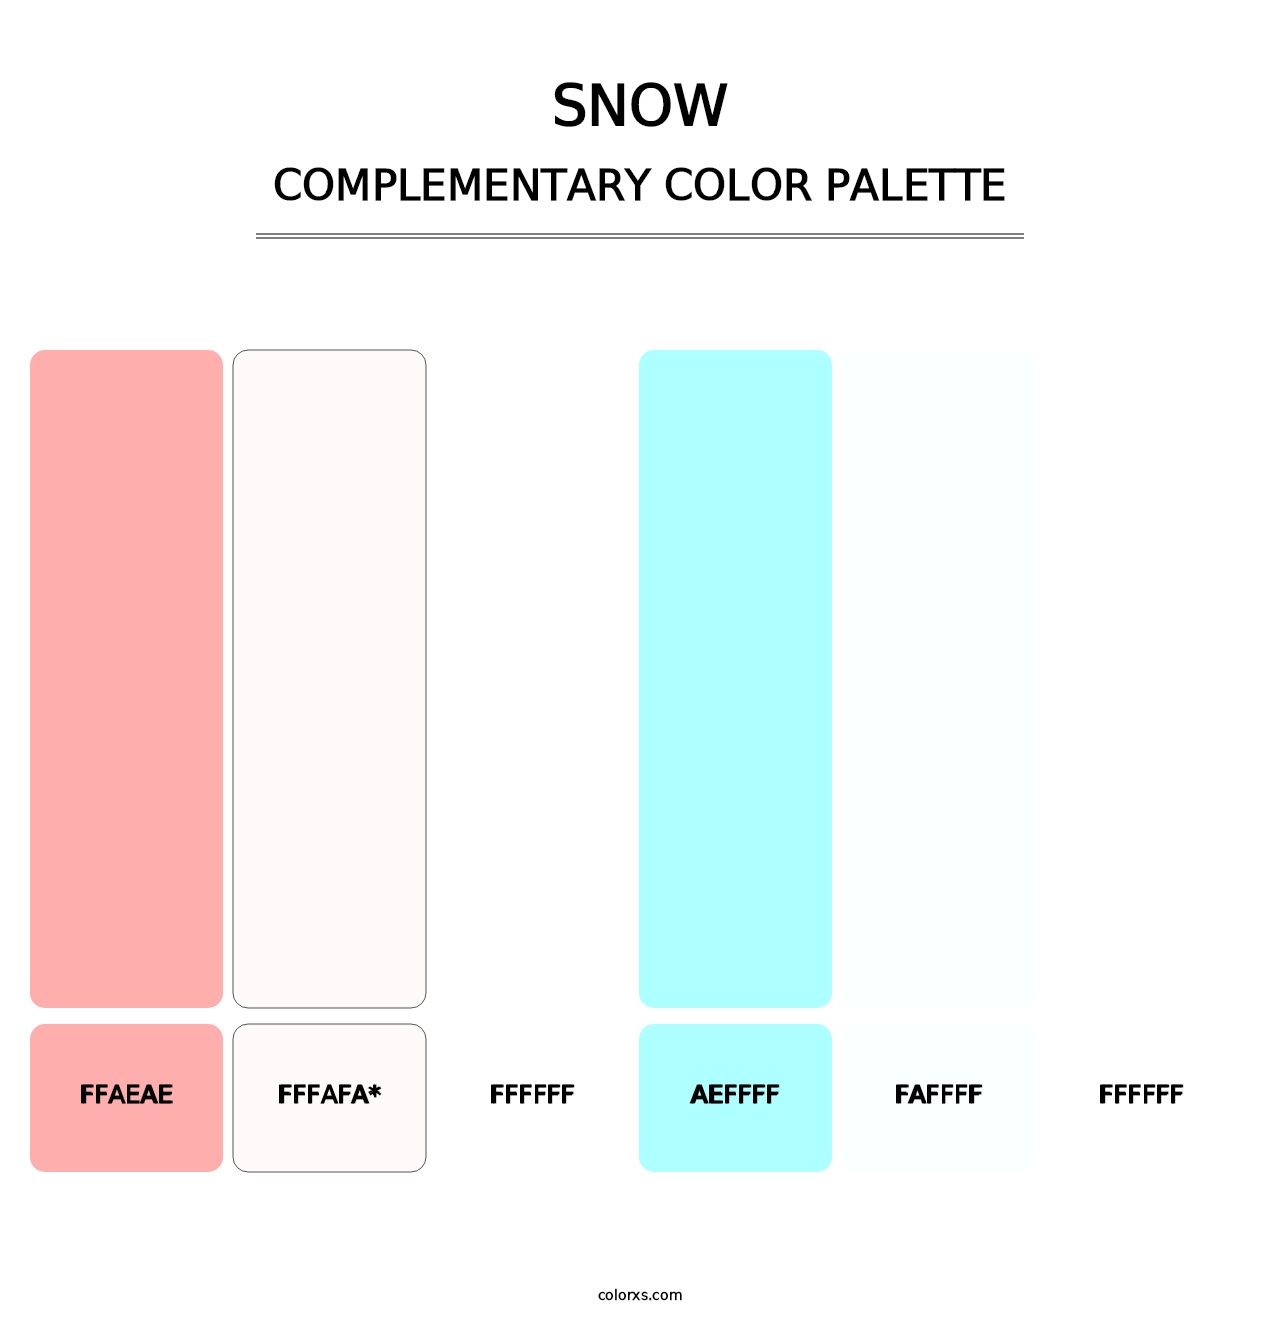 Snow - Complementary Color Palette